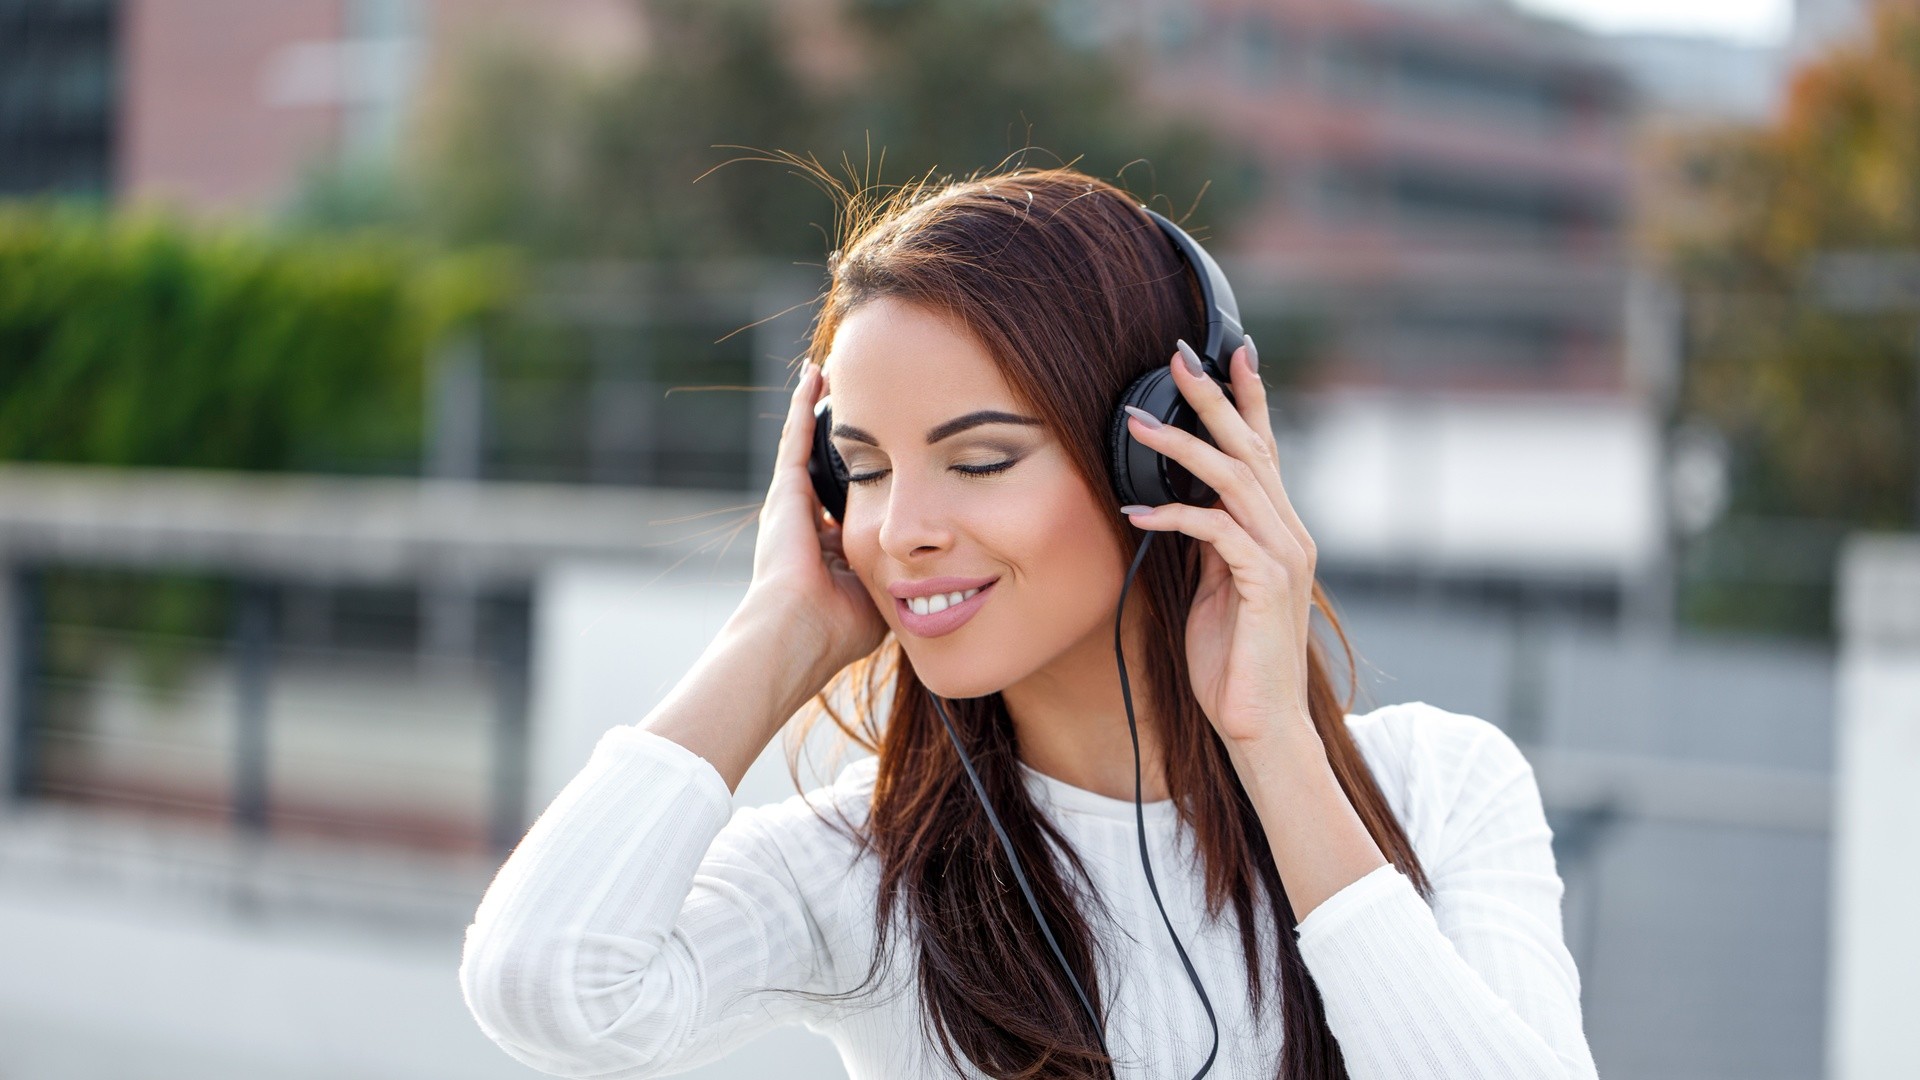 Beautiful Woman Listening To Music With Headphones Stock Photo   Image